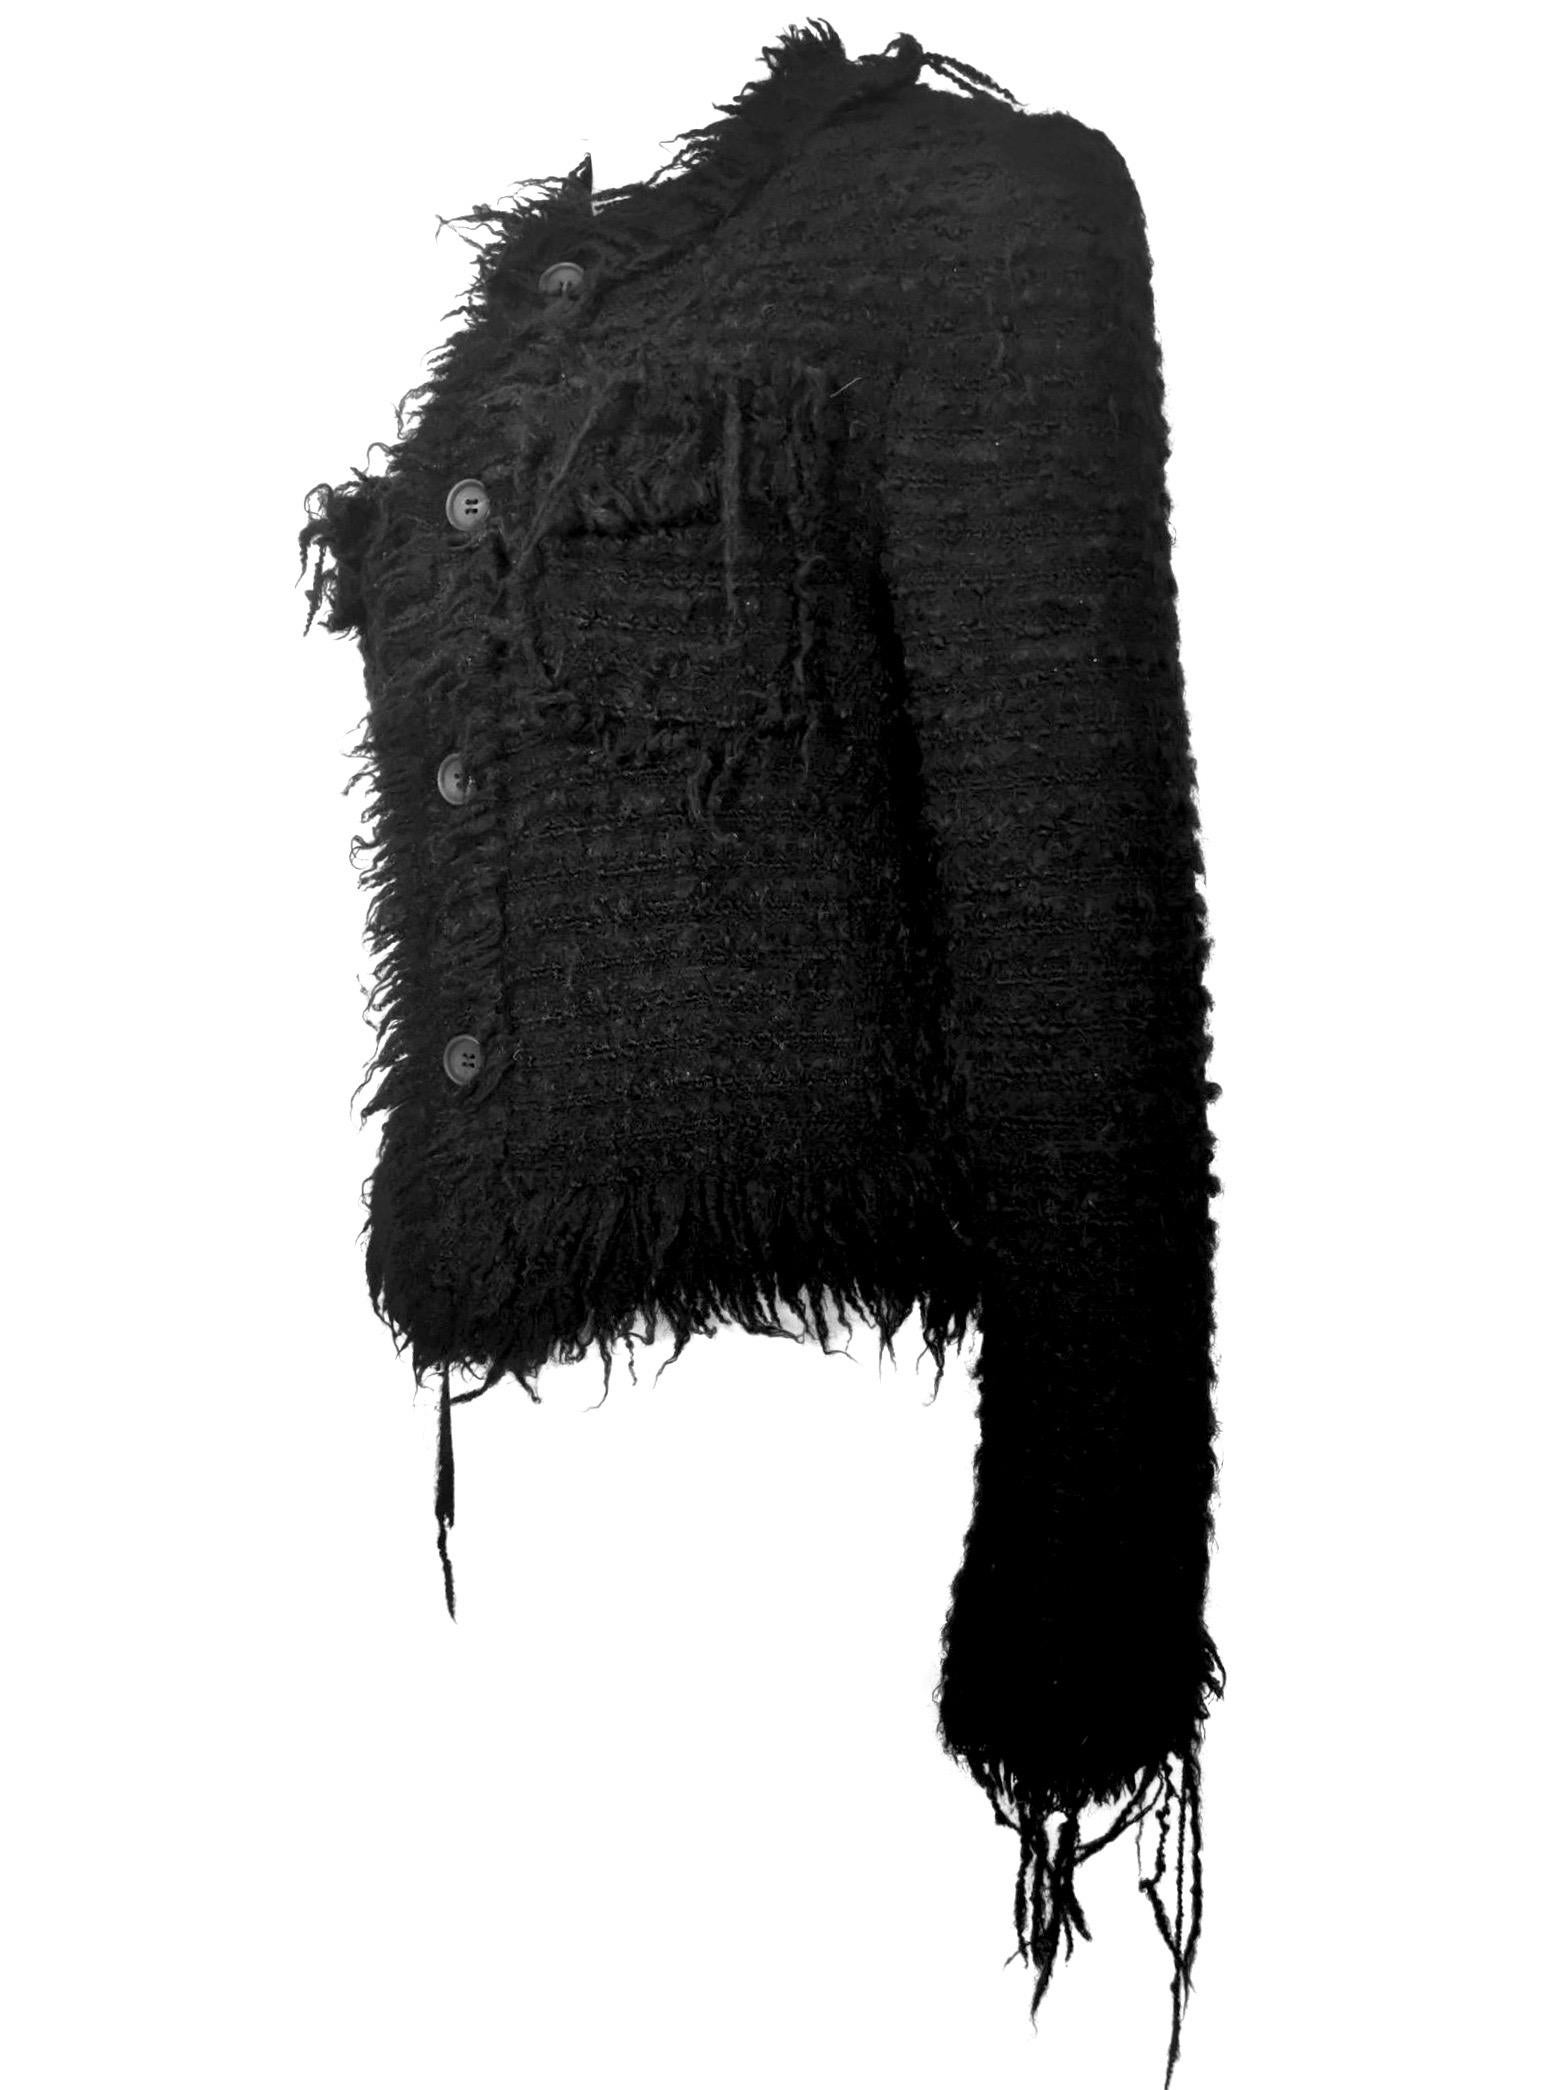 Comme des Garcons Junya Watanabe Cropped Chanel Style Fringed Jacket AD 2003 2